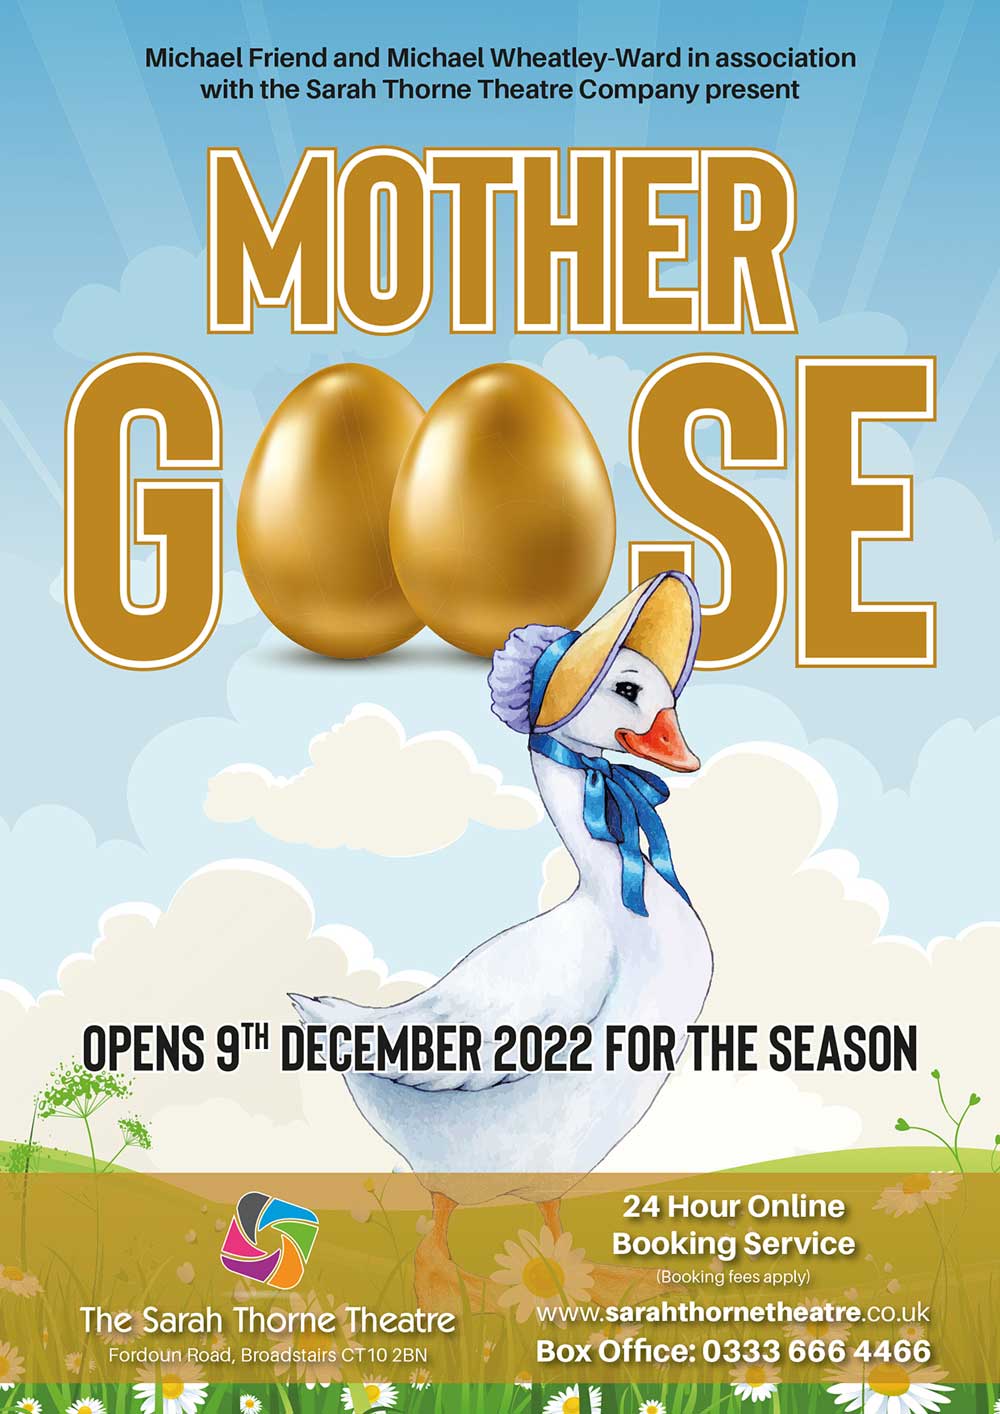 Image of Sarah Thorne Theatre event - Mother Goose